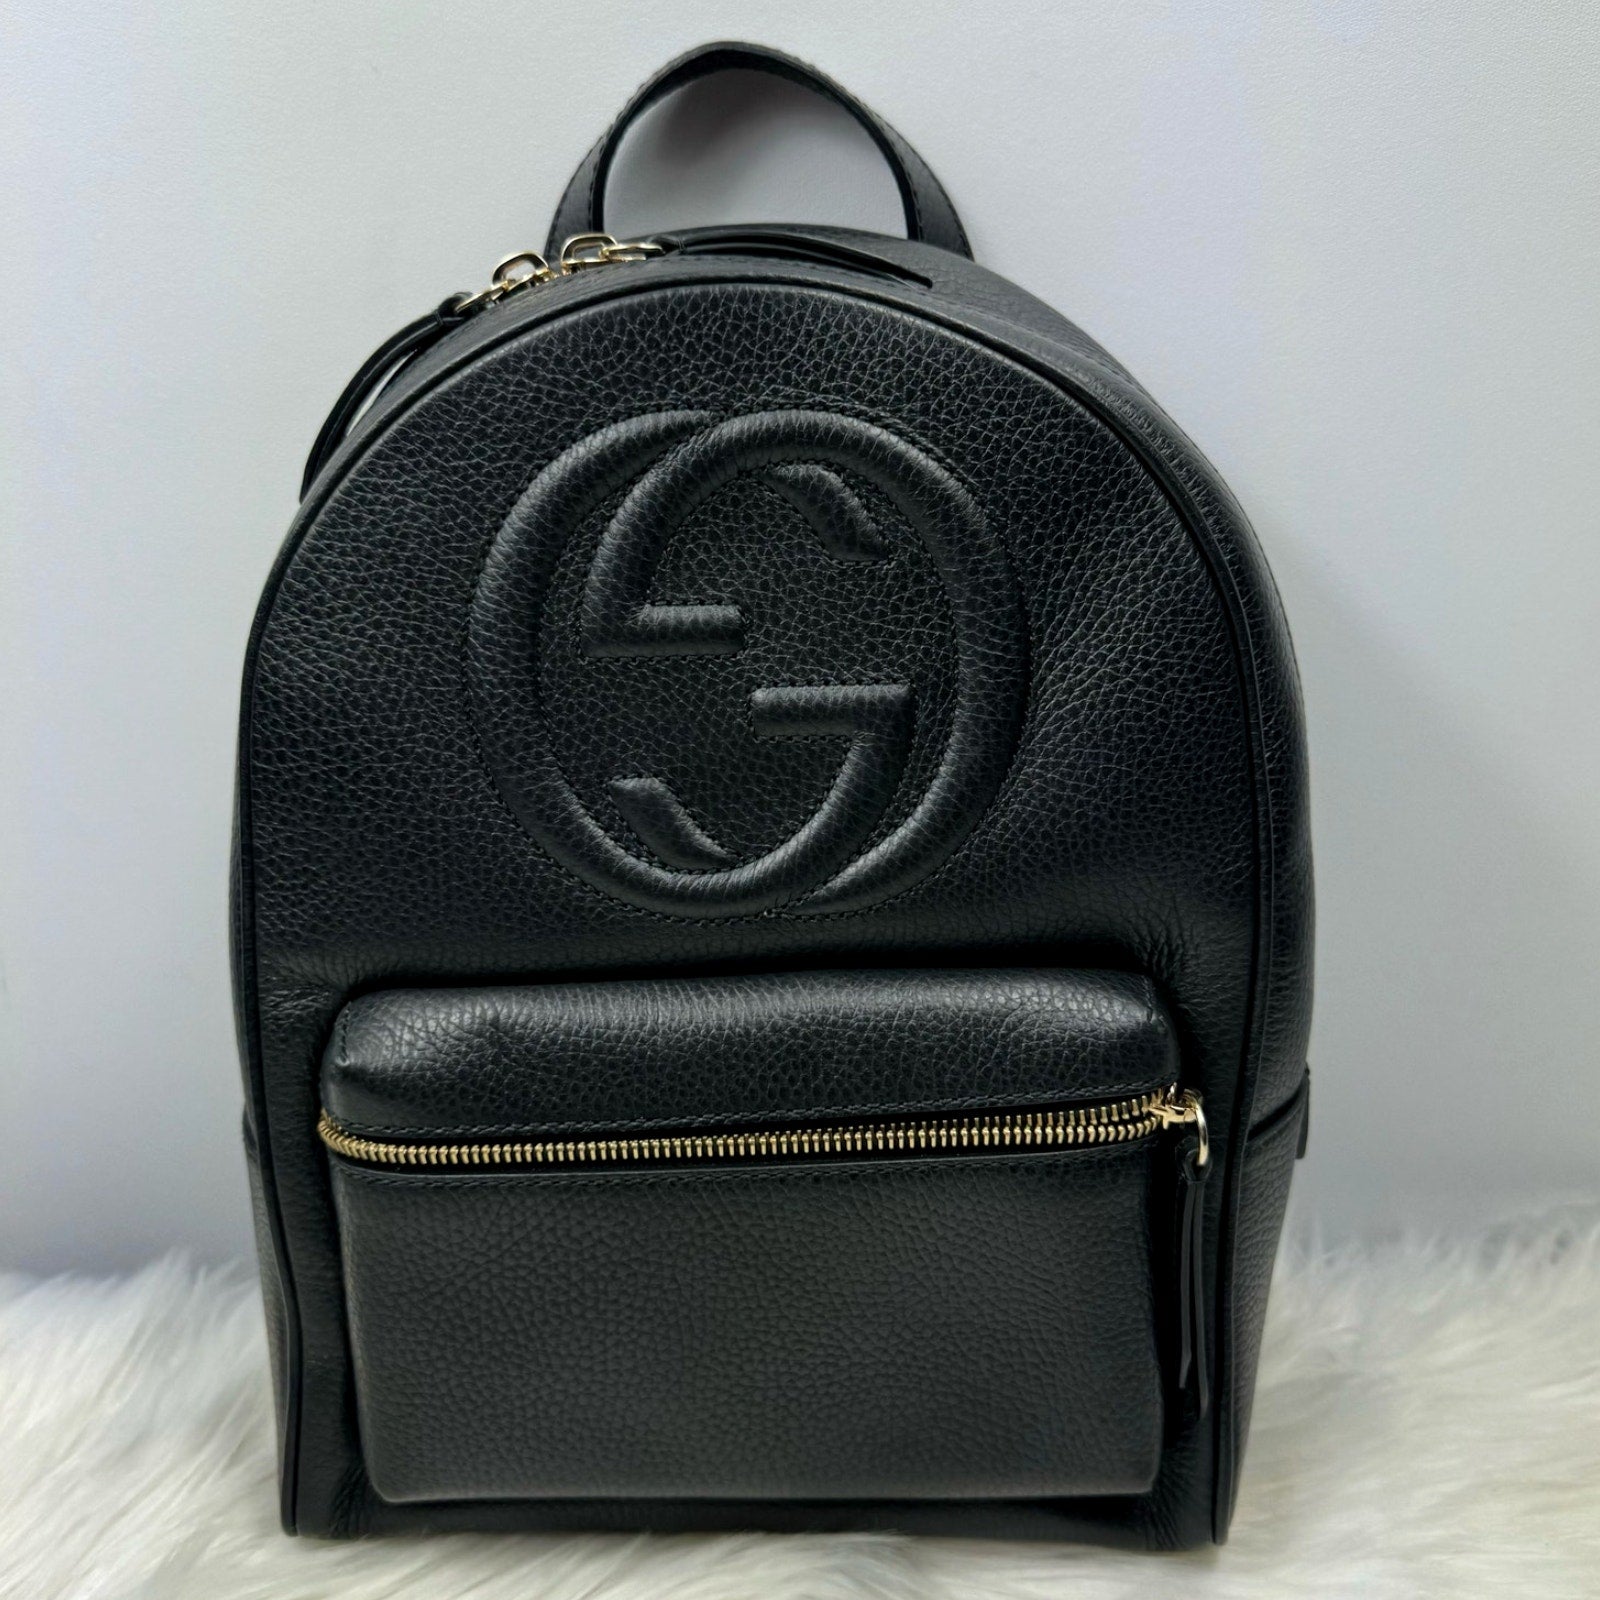 Authentic GUCCI Backpack